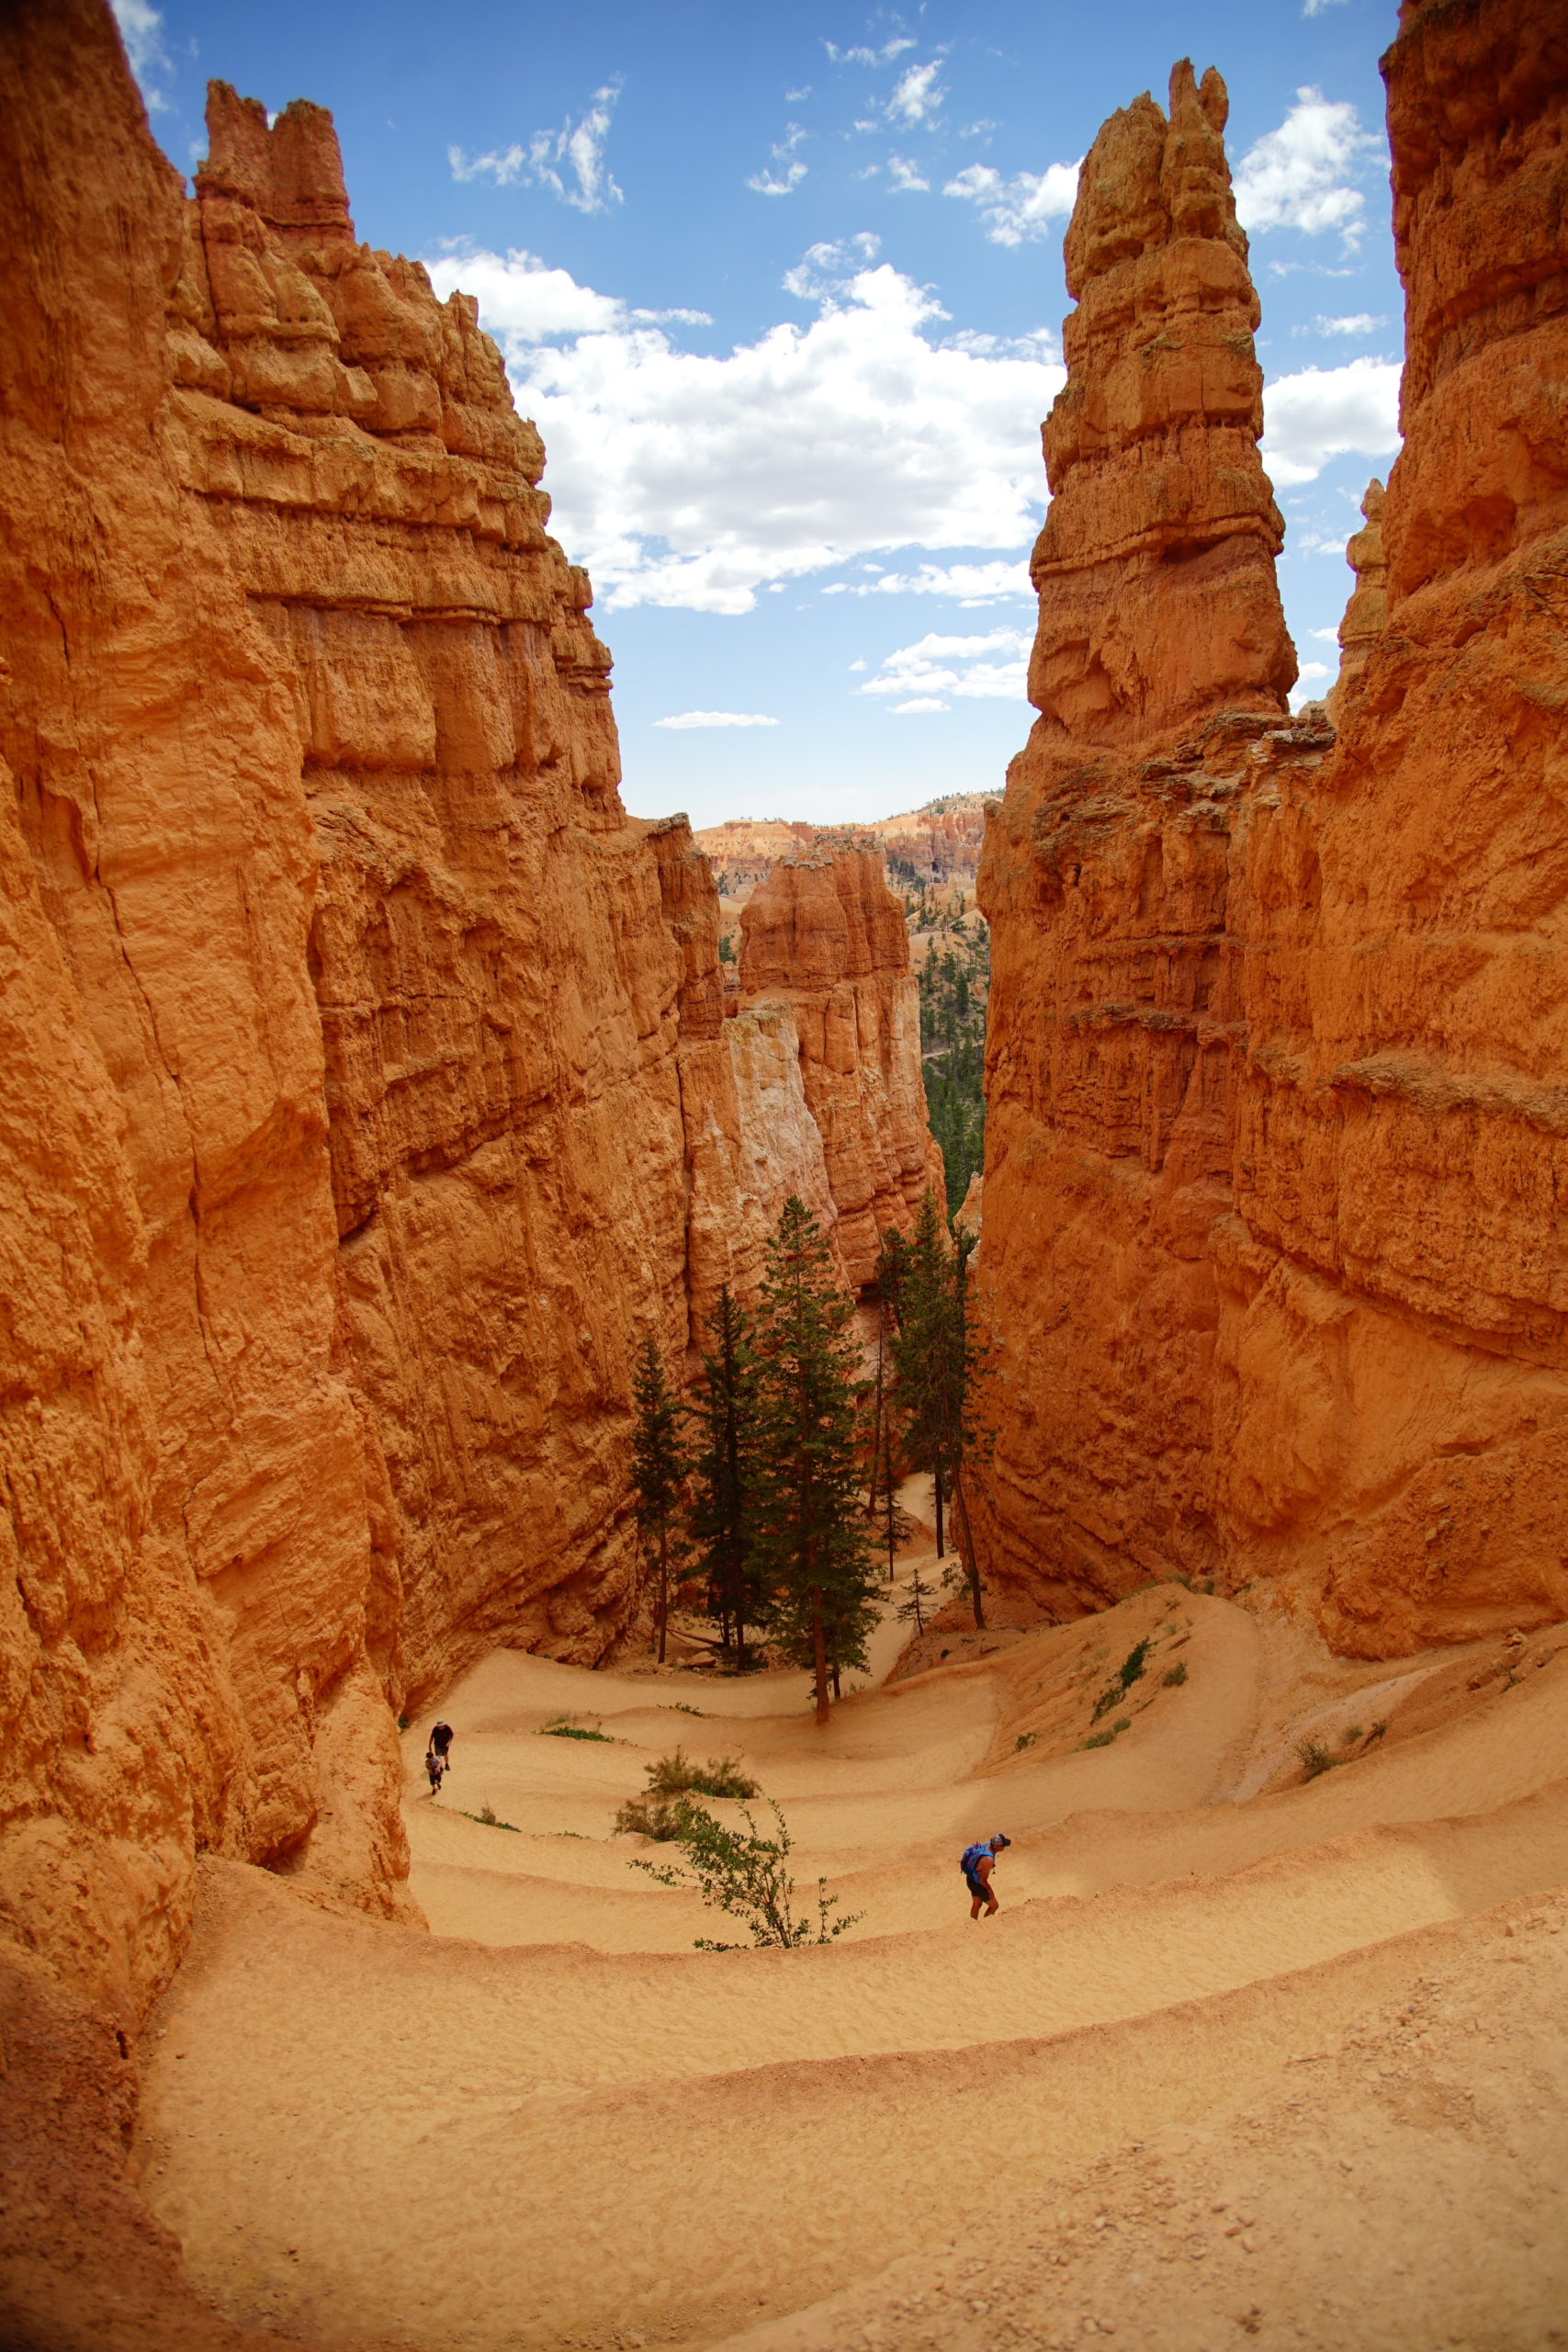 Hikers in a sand filled southwest canyon